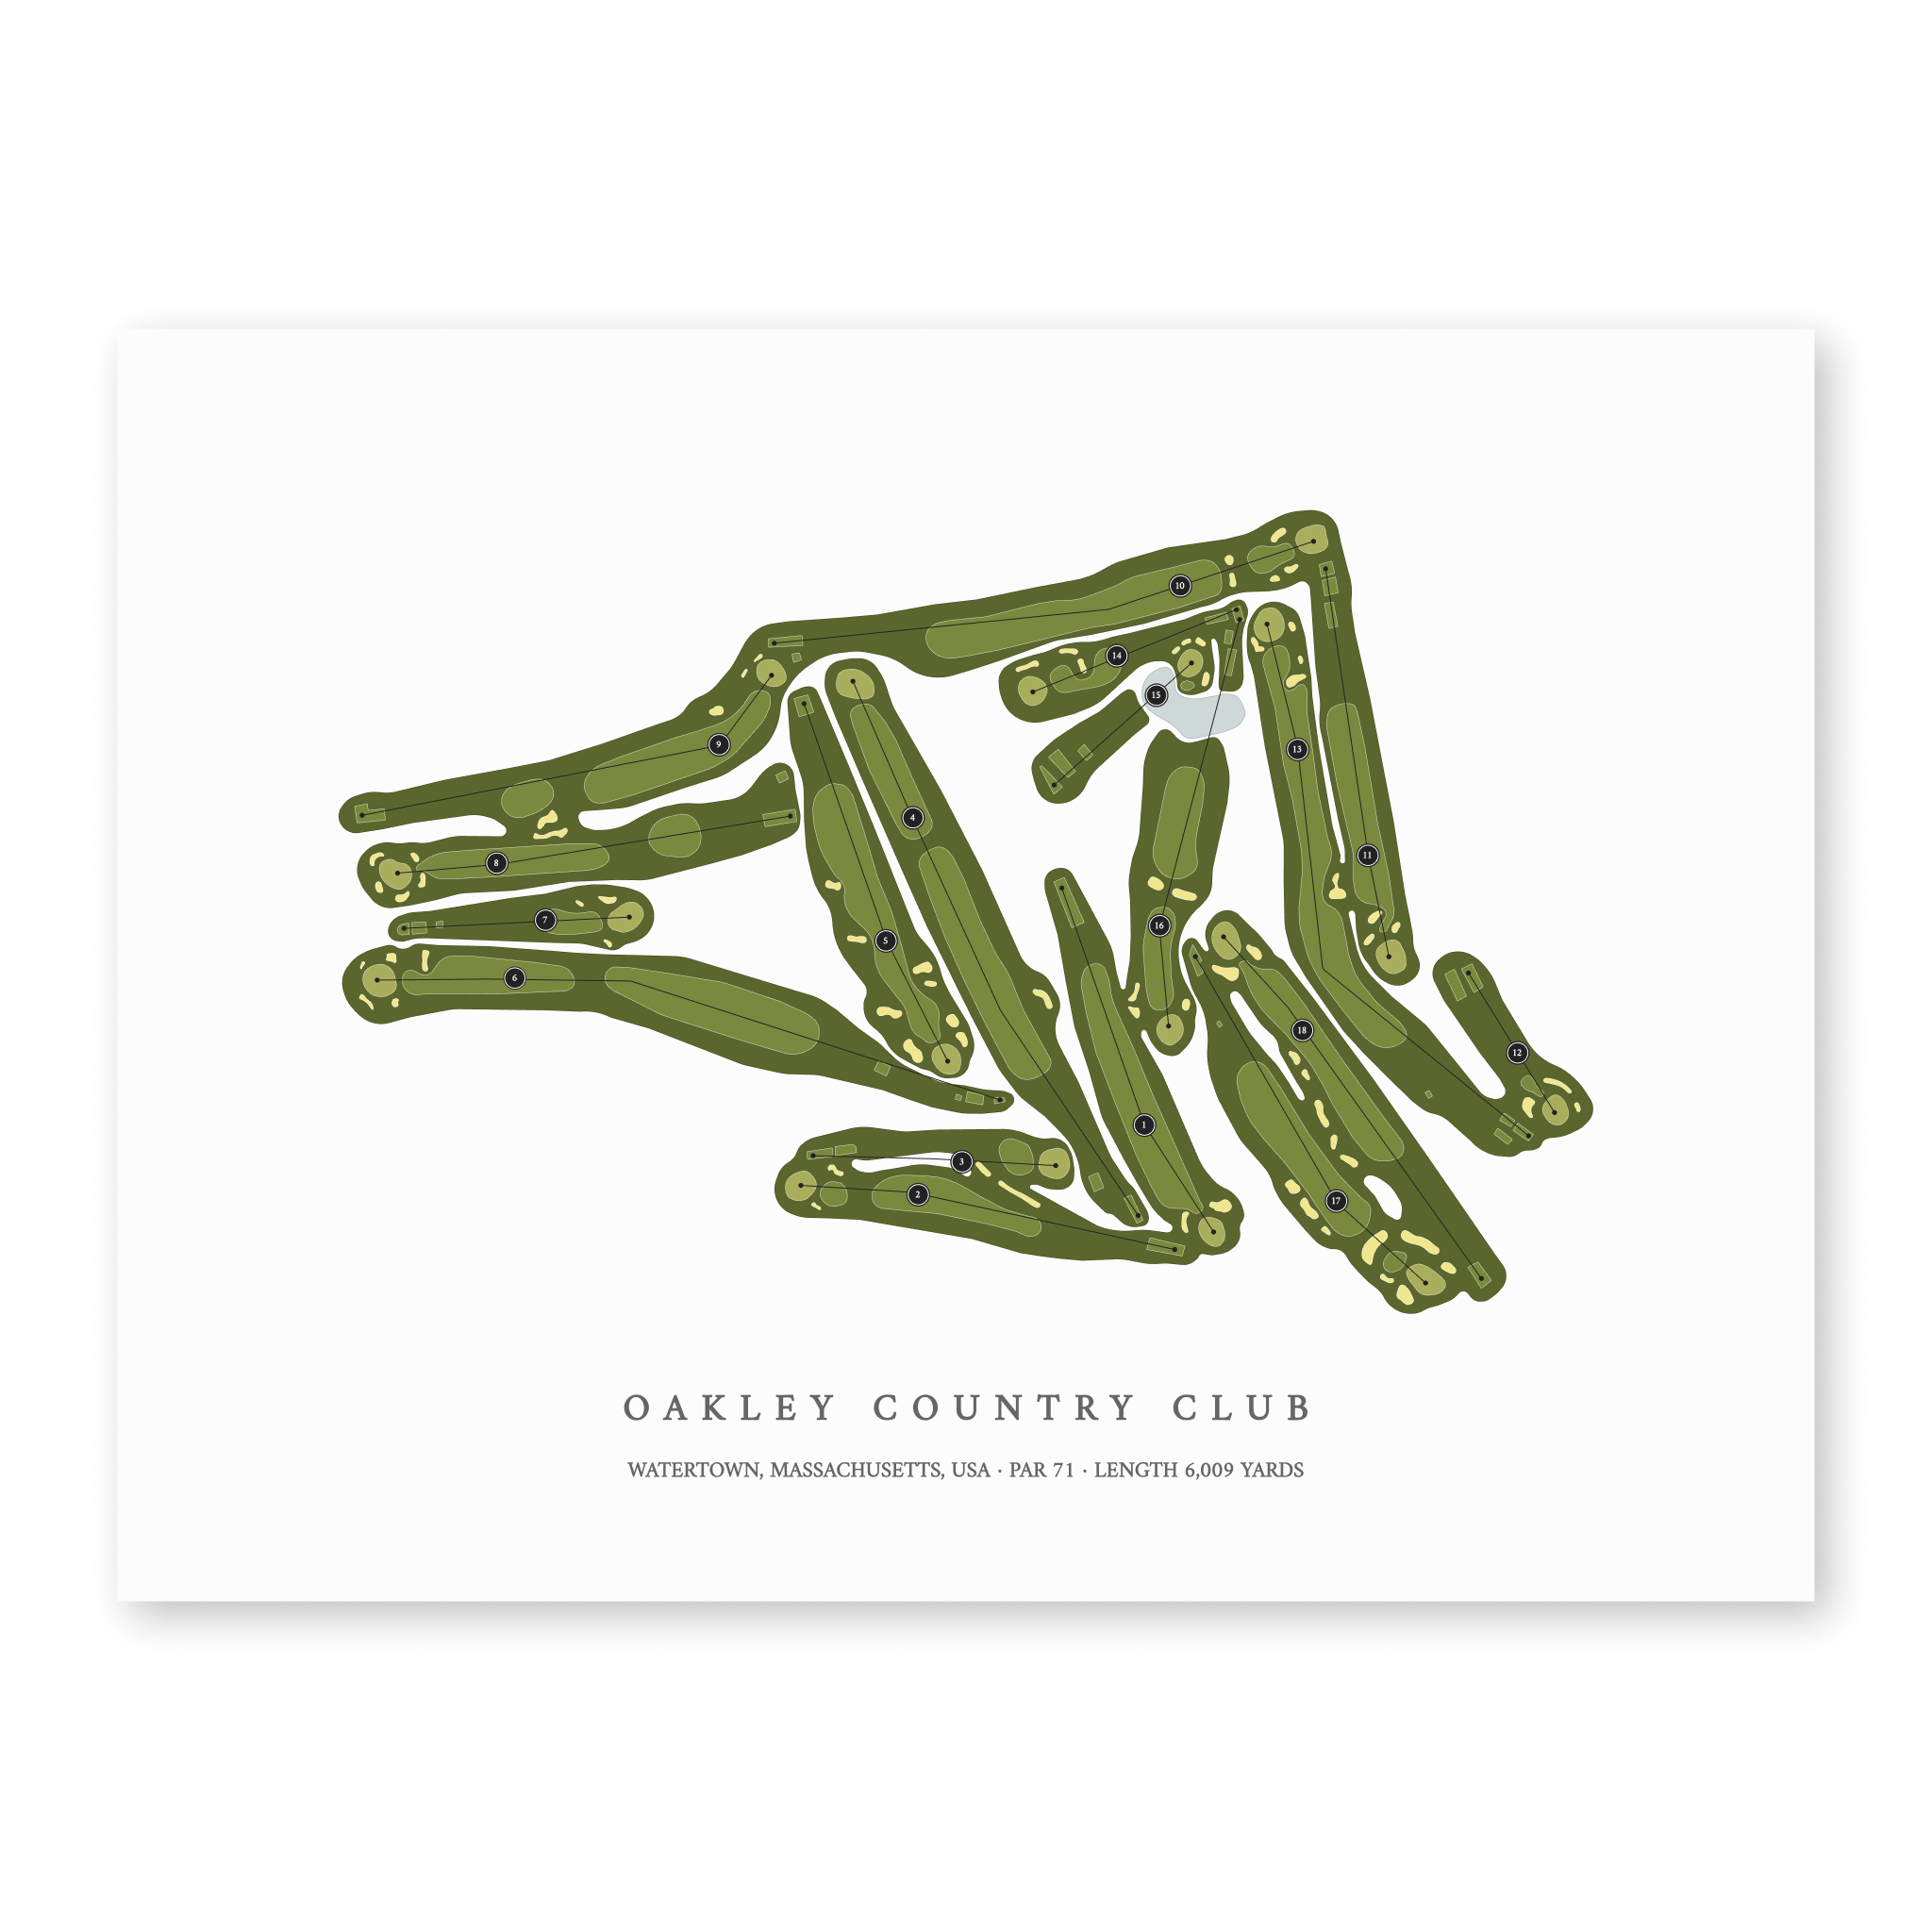 Oakley Country Club | Golf Course Map | Unframed